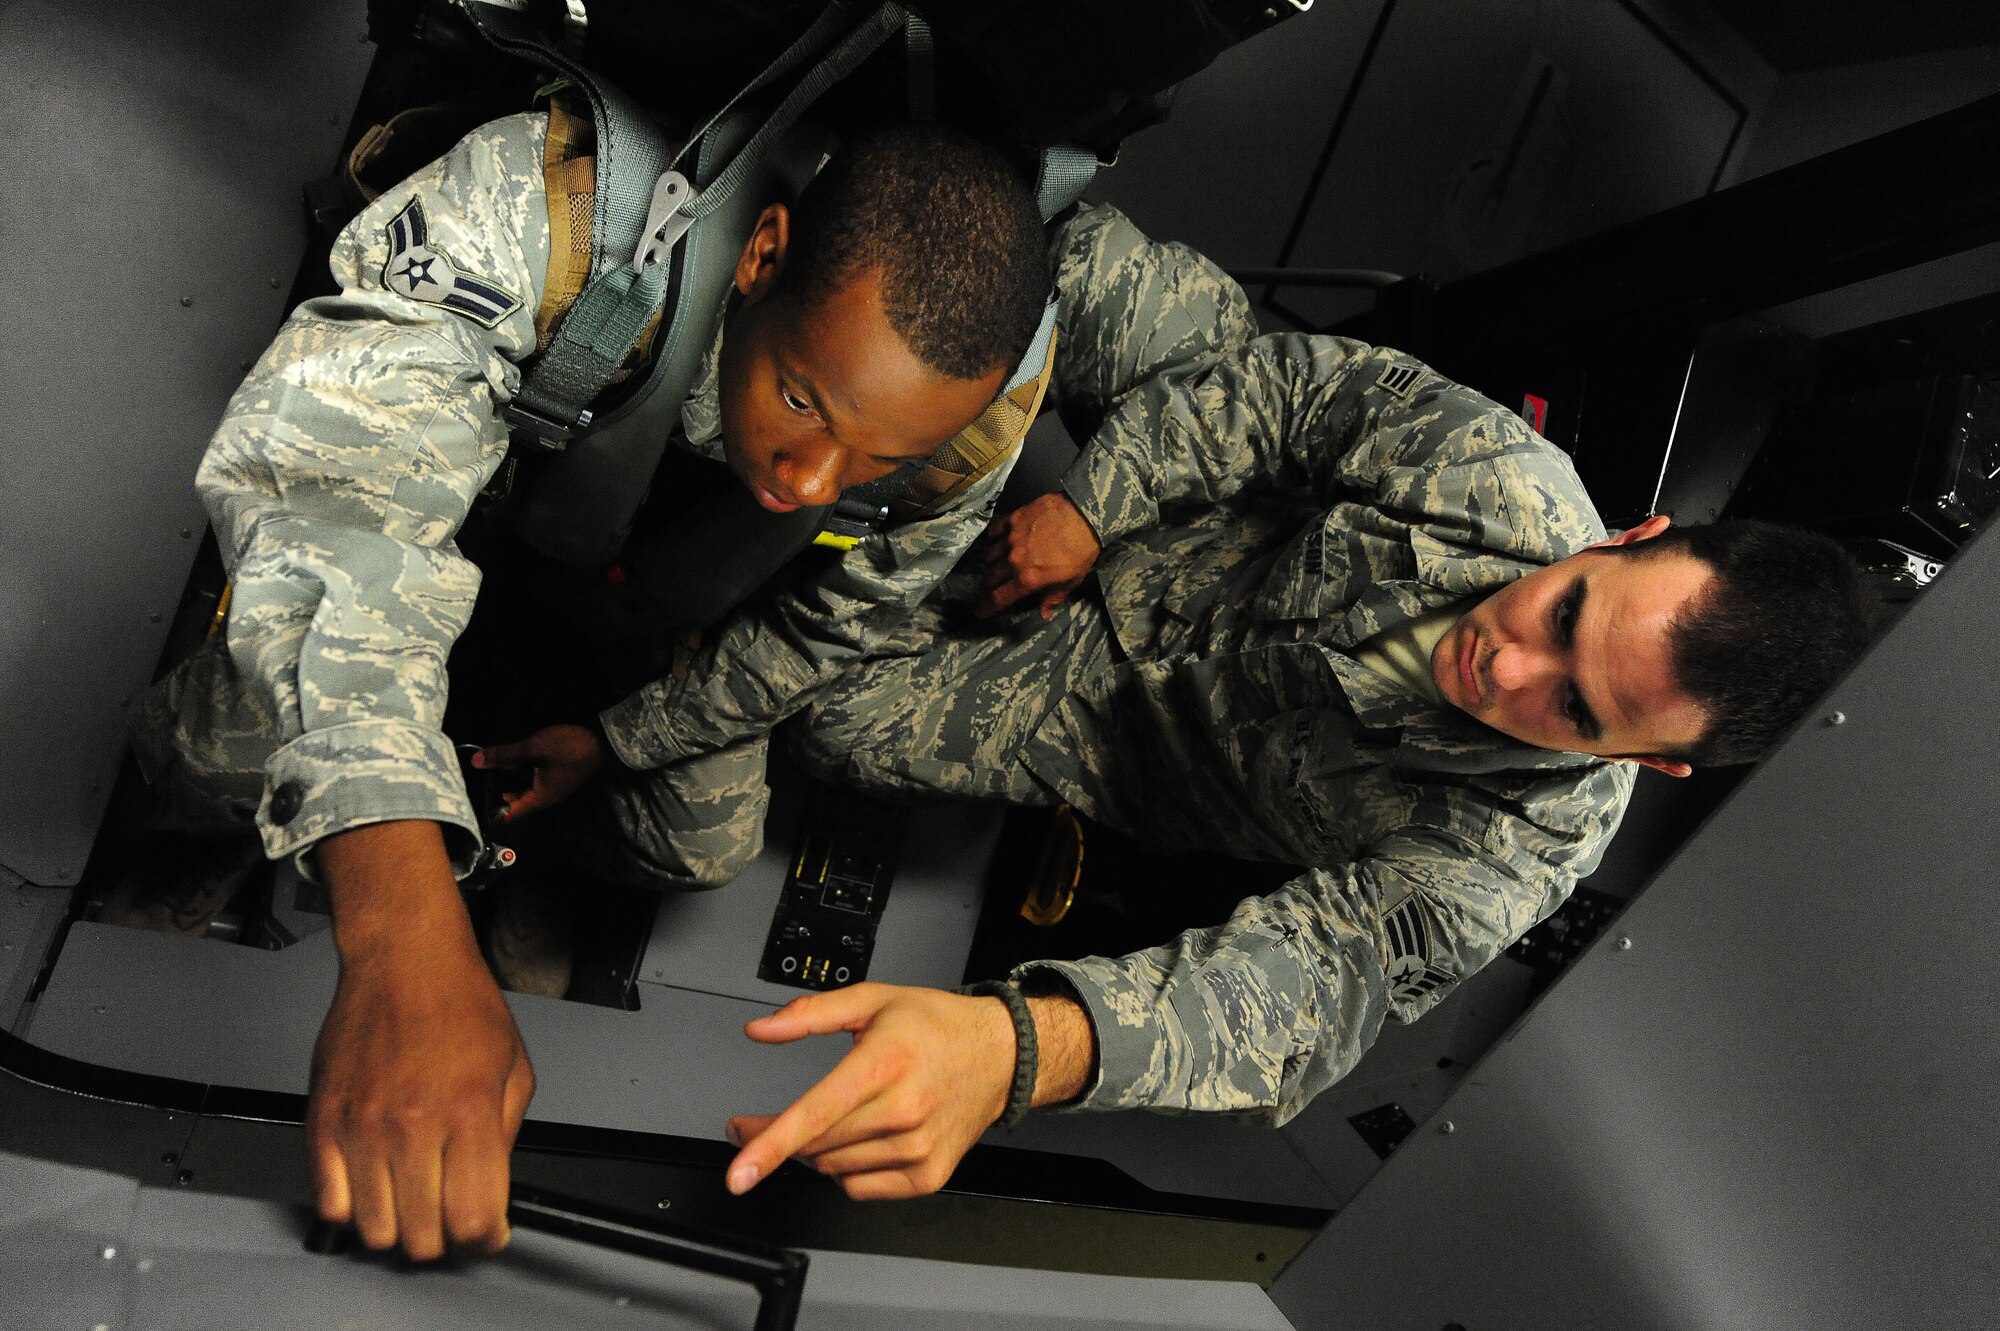 Airman 1st Class Dalvin Washington receives training from fellow 509th Operations Support Squadron aircrew flight equipment member Senior Airman Ethan Mason at Whiteman Air Force Base, Mo., July 16, 2013.  This was done as part of a training scenario with the first wave of Airsave technicians, who were equipped to then train other OSS members. (U.S. Air Force photo by Staff Sgt. Nick Wilson/Released)